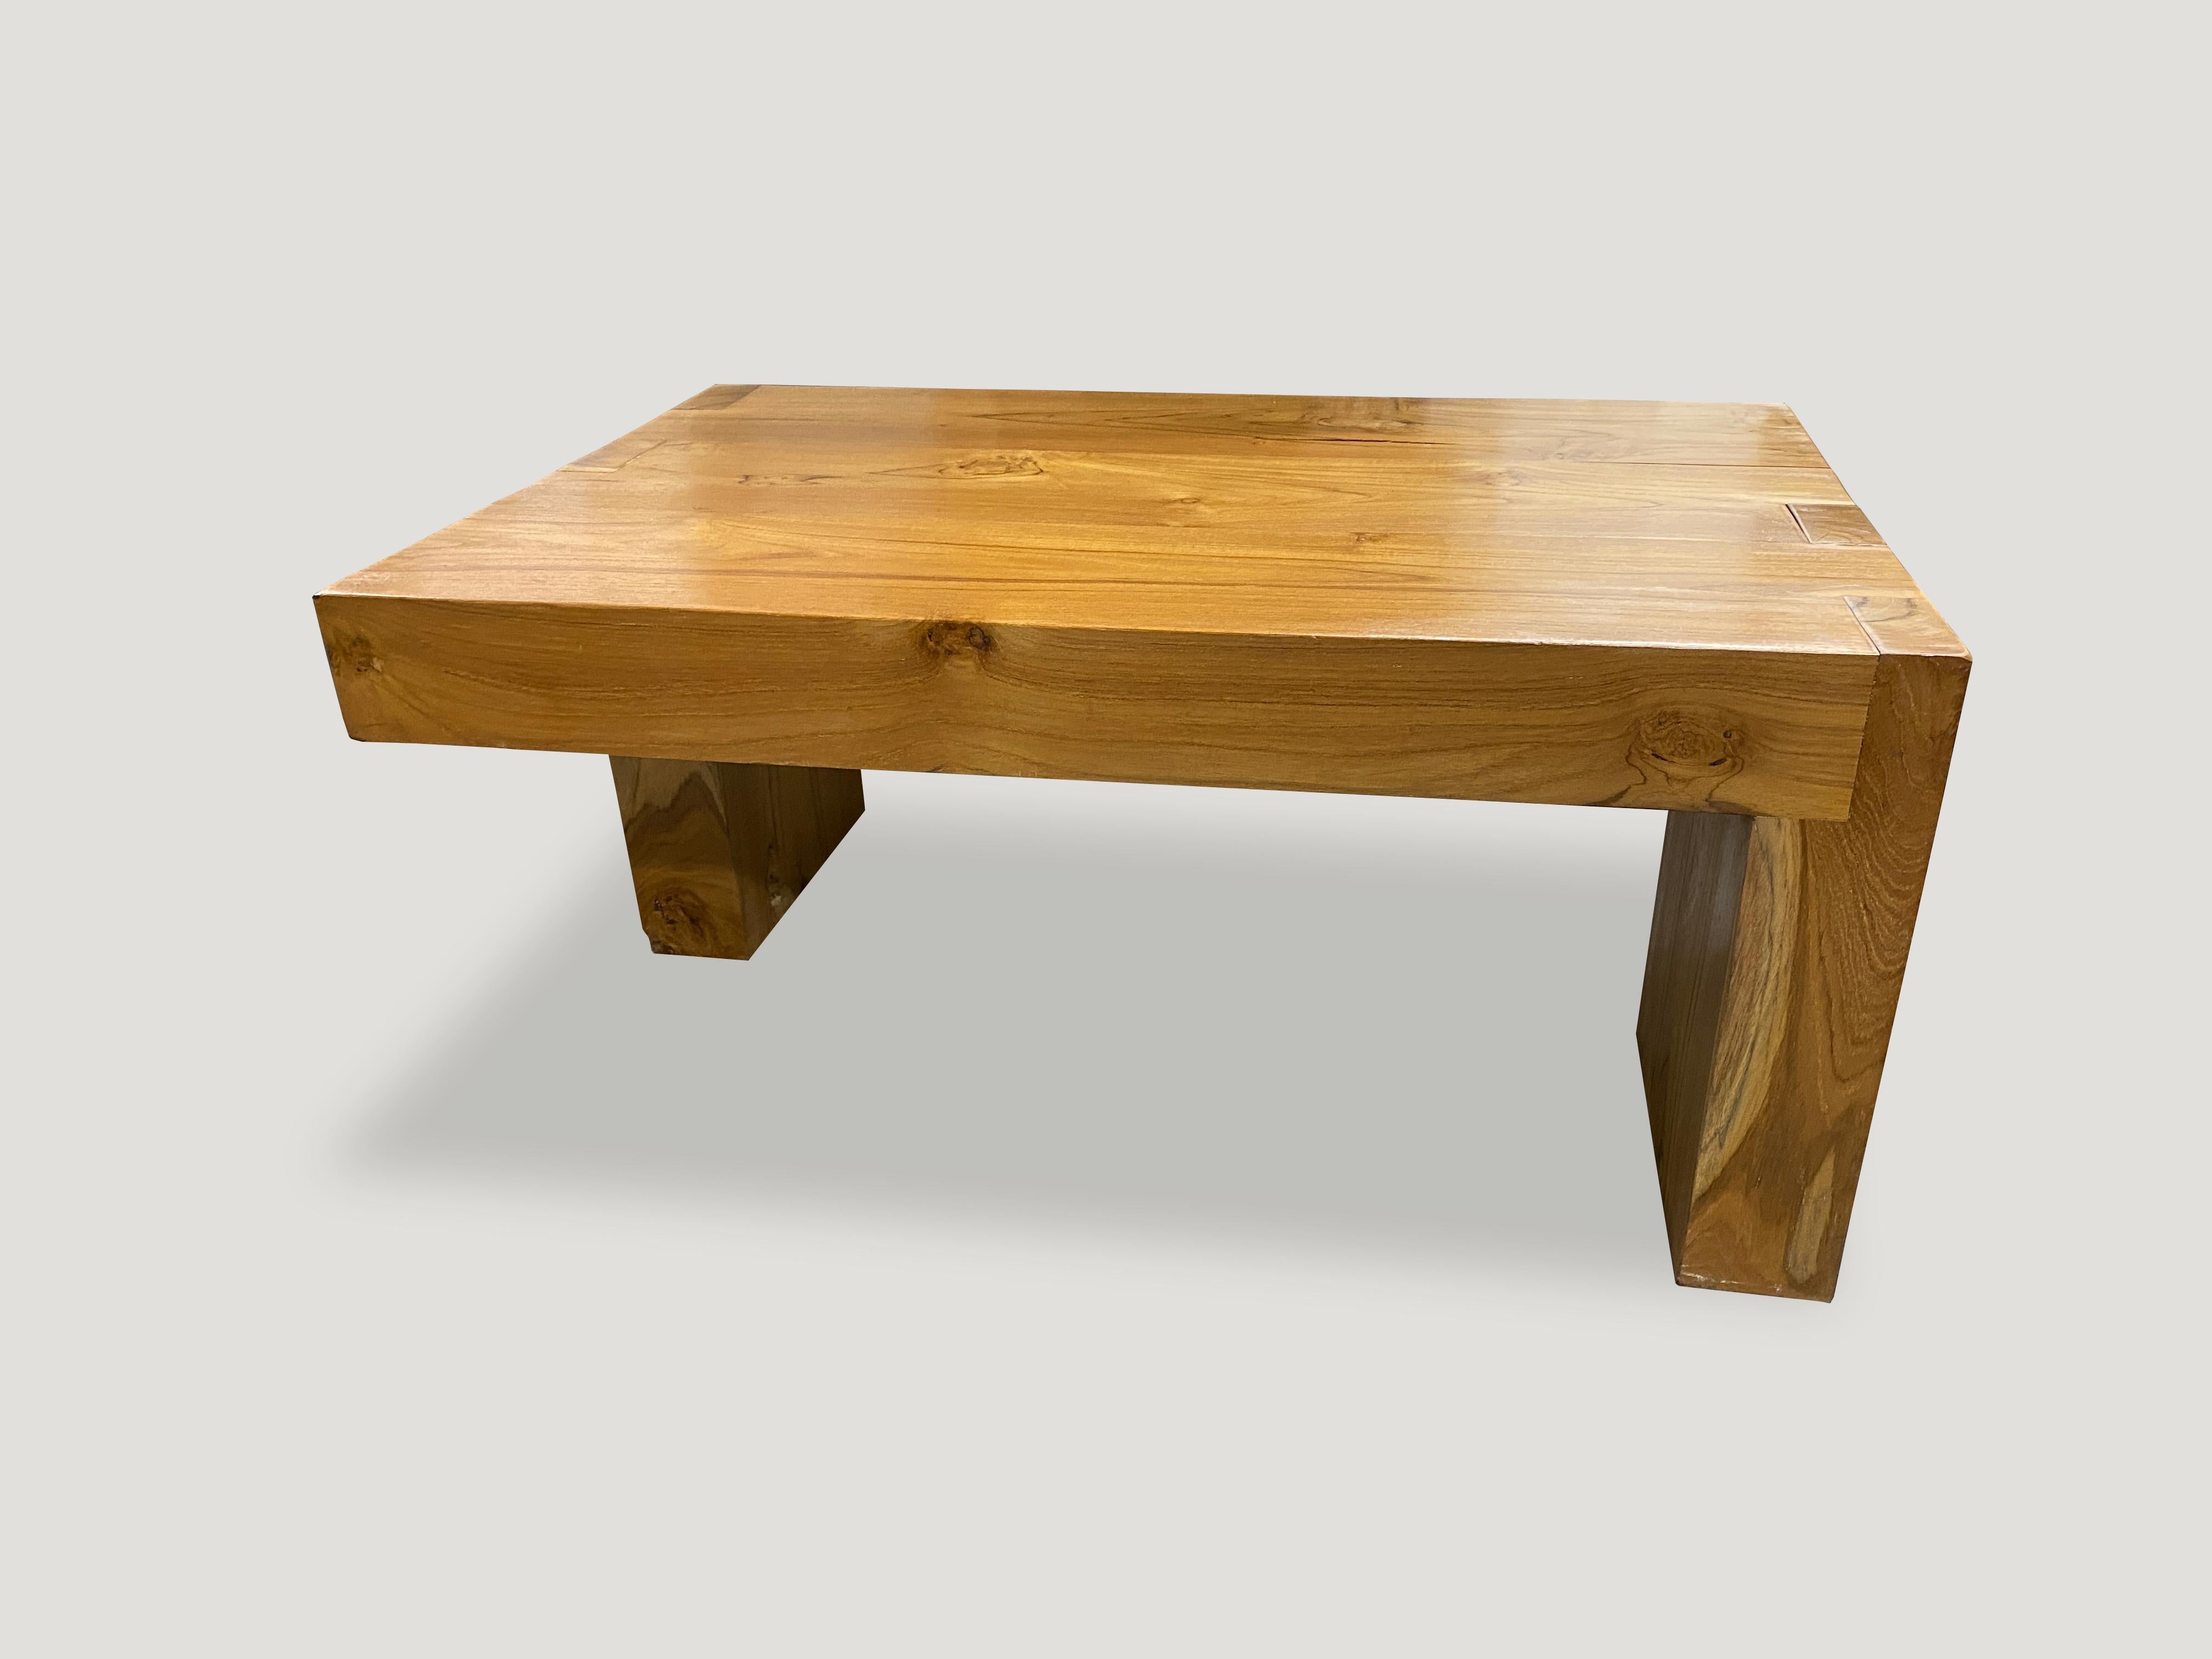 Andrianna Shamaris Teak Wood Balance Coffee Table In Excellent Condition For Sale In New York, NY